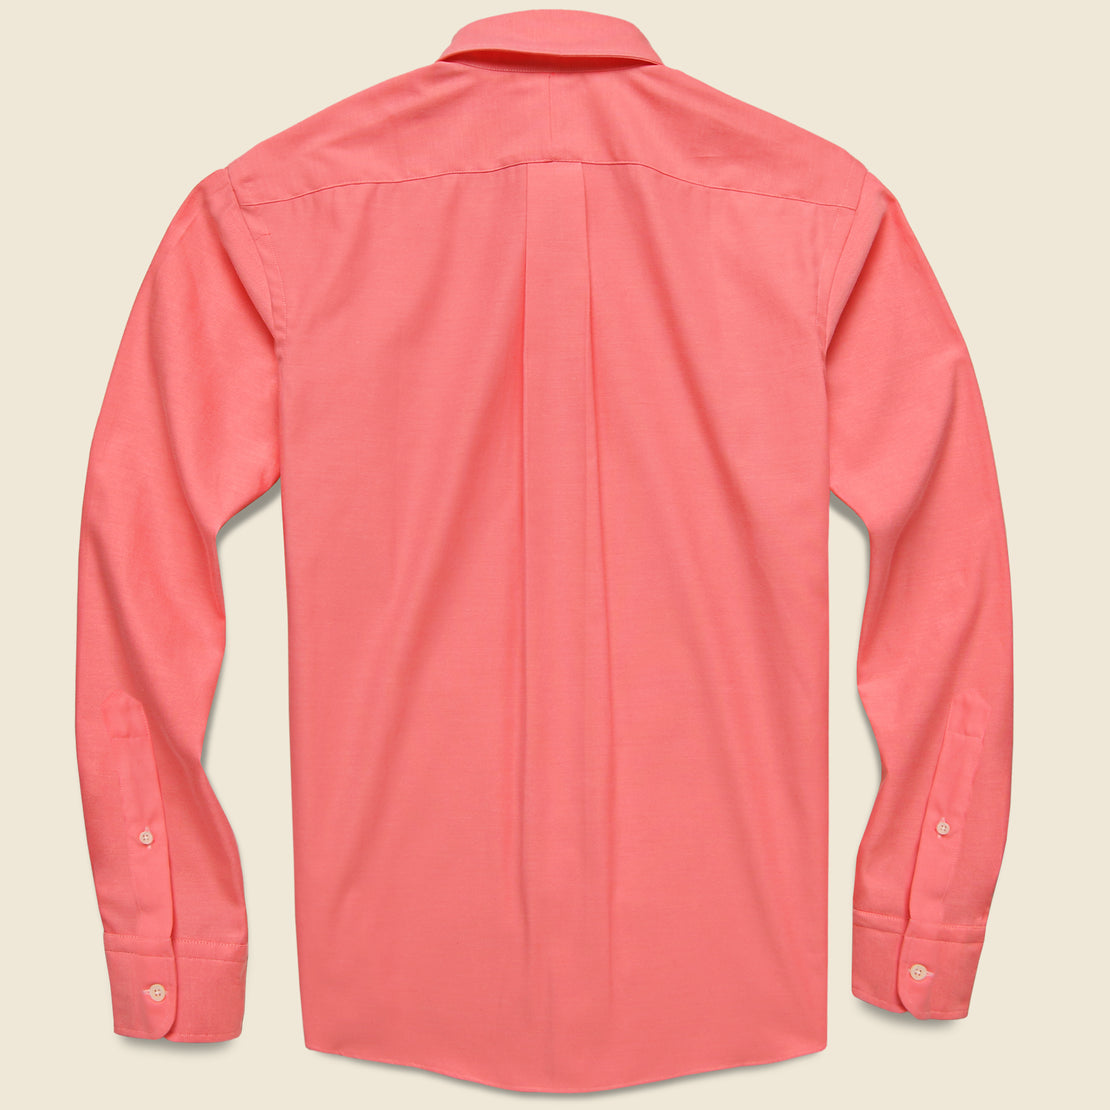 Neon Oxford Shirt - Pink - Hamilton Shirt Co. - STAG Provisions - Tops - L/S Woven - Solid